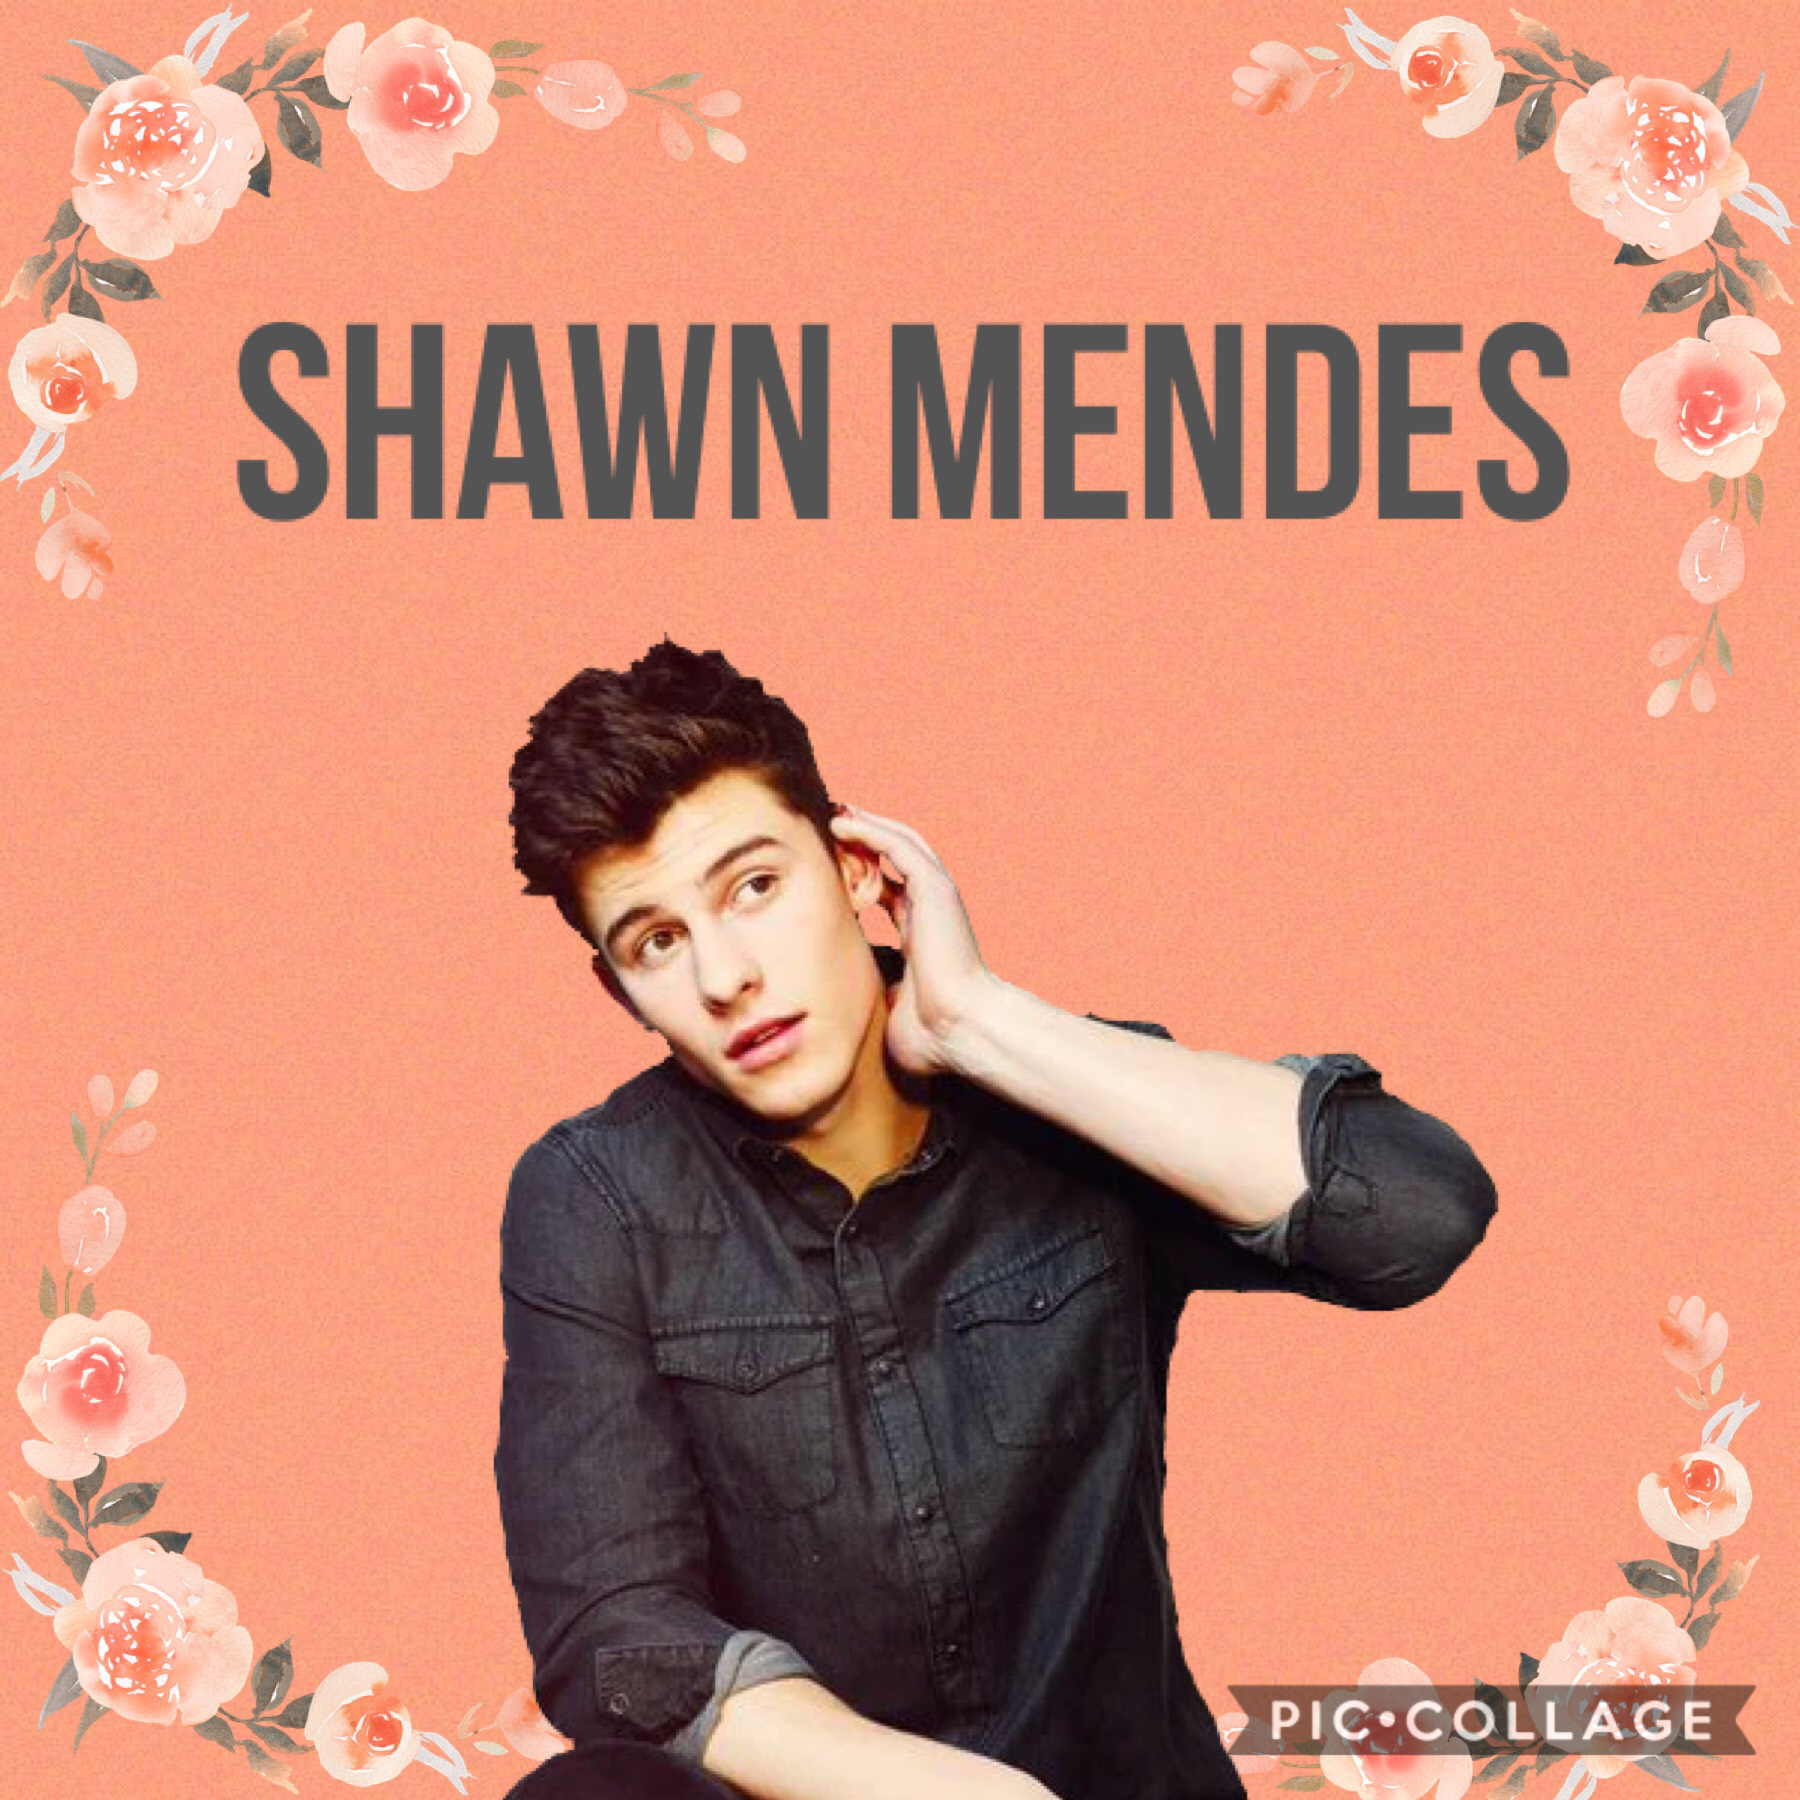 This is a simple edit of Shawn Mendes. 